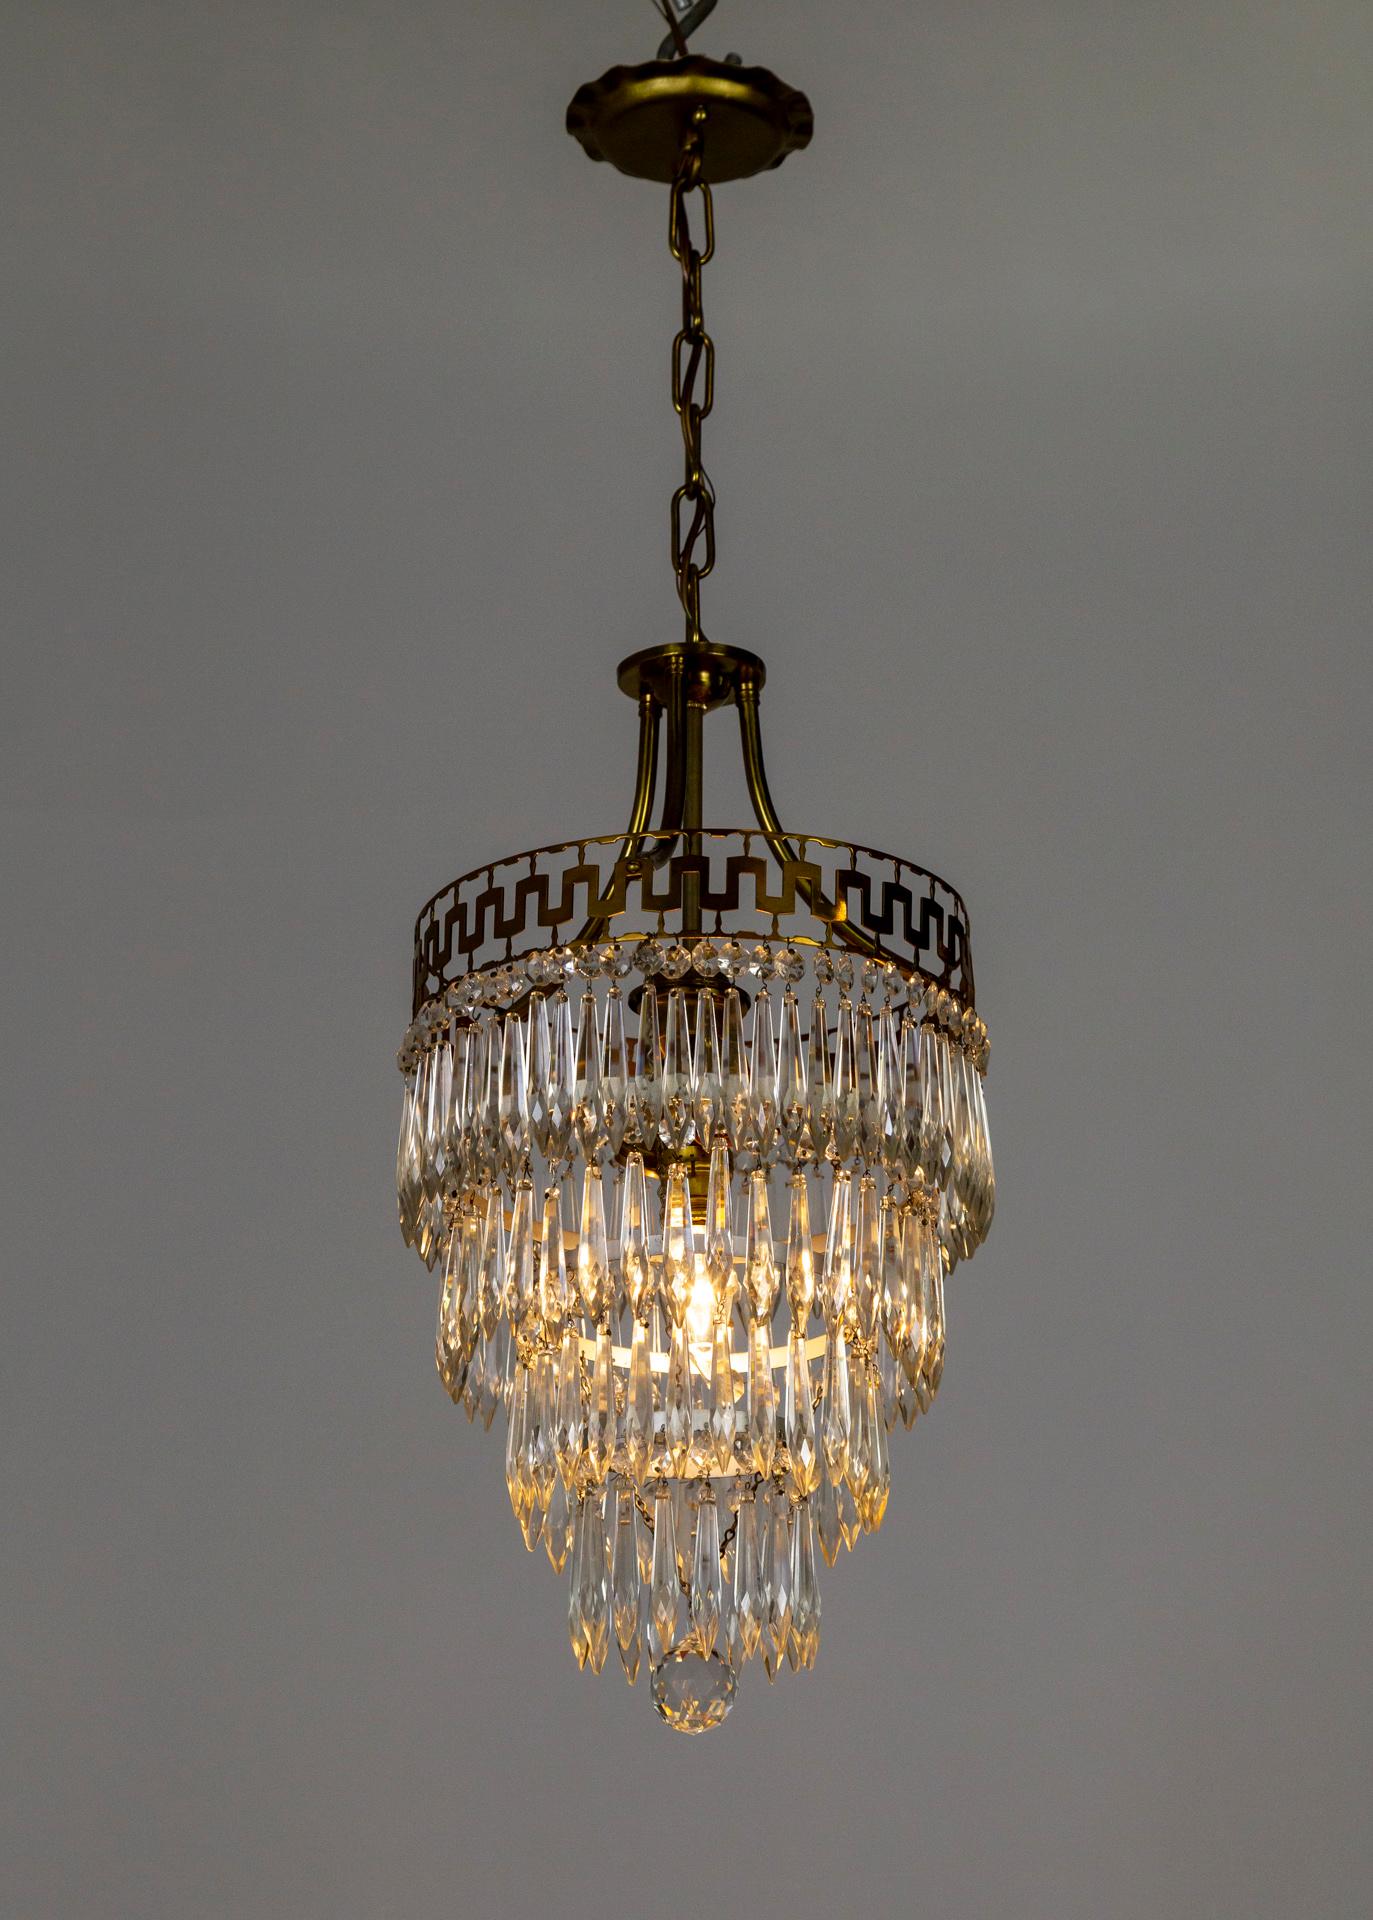 Mid-20th Cent. Neoclassical Cut Brass & Crystal Wedding Cake Pendant Light In Good Condition For Sale In San Francisco, CA